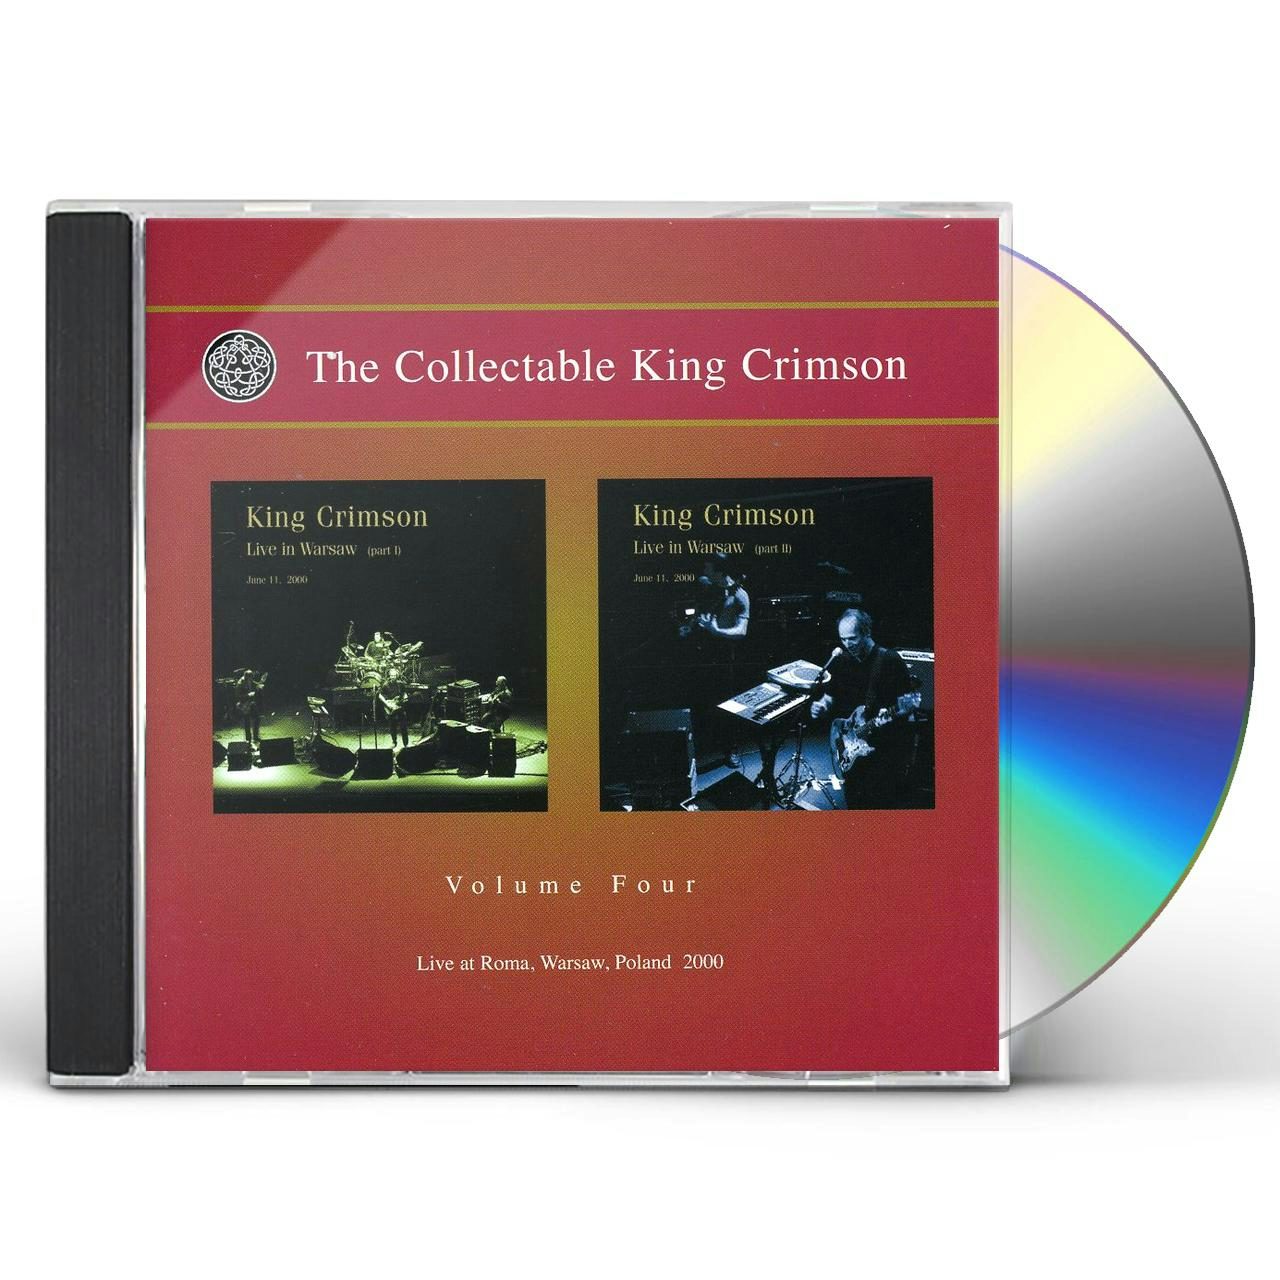 The Collectable King Crimson Volume Four 